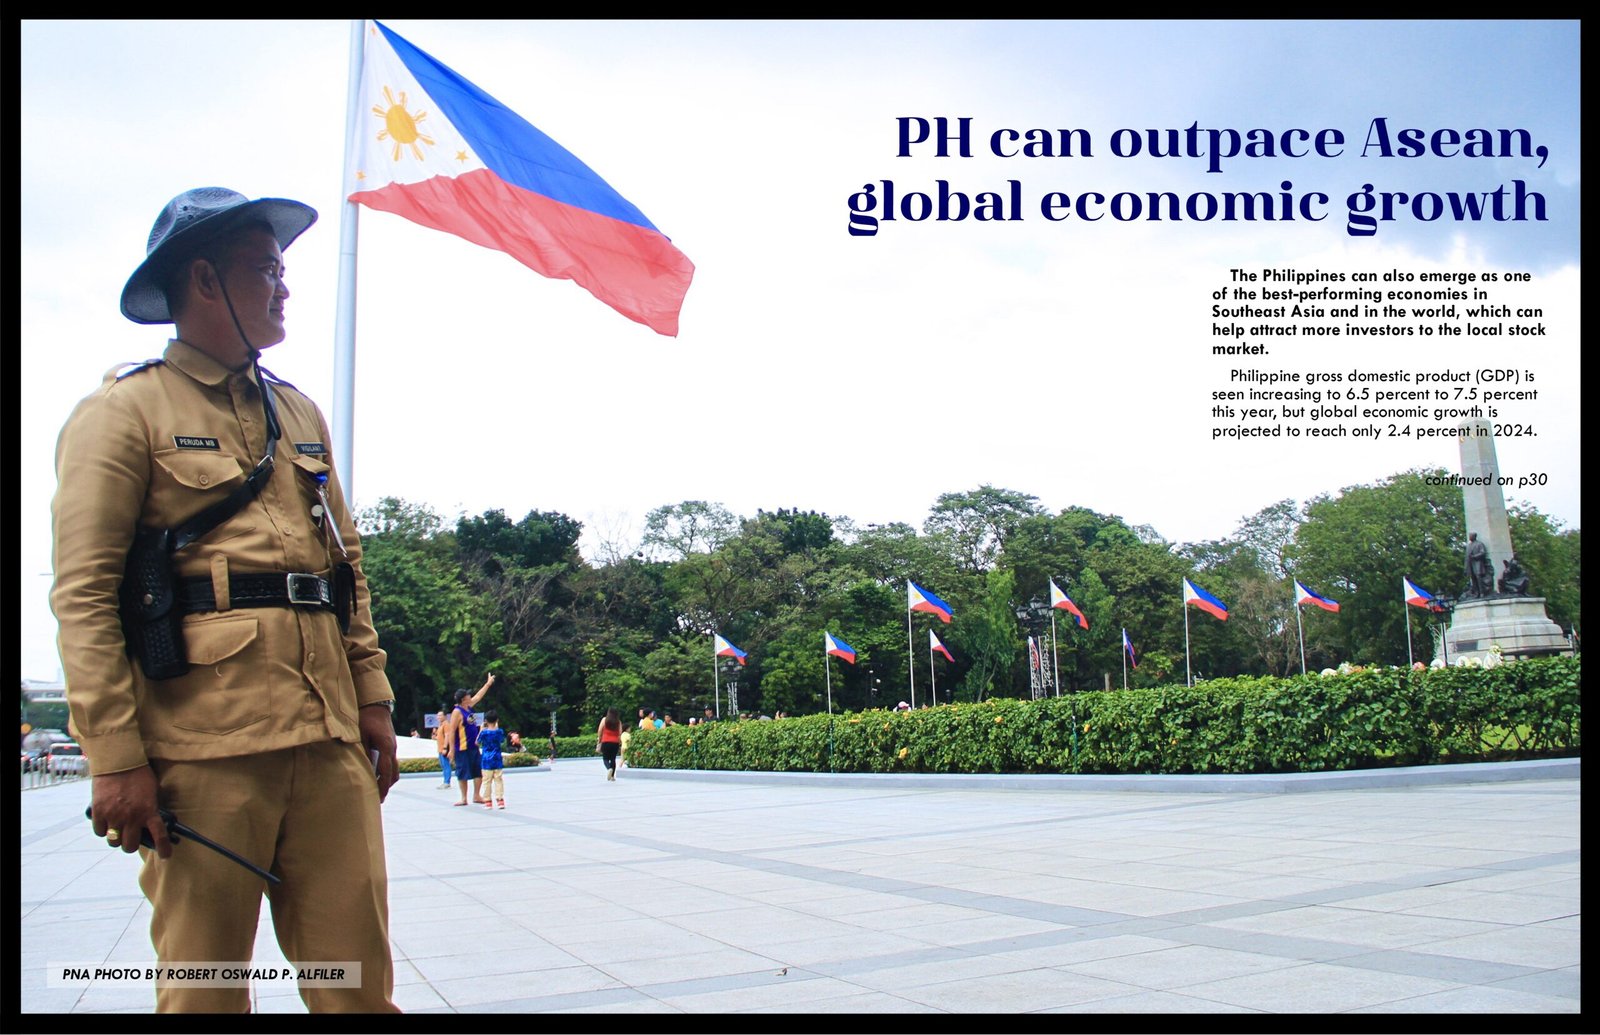 PH can outpace Asean global economic growth